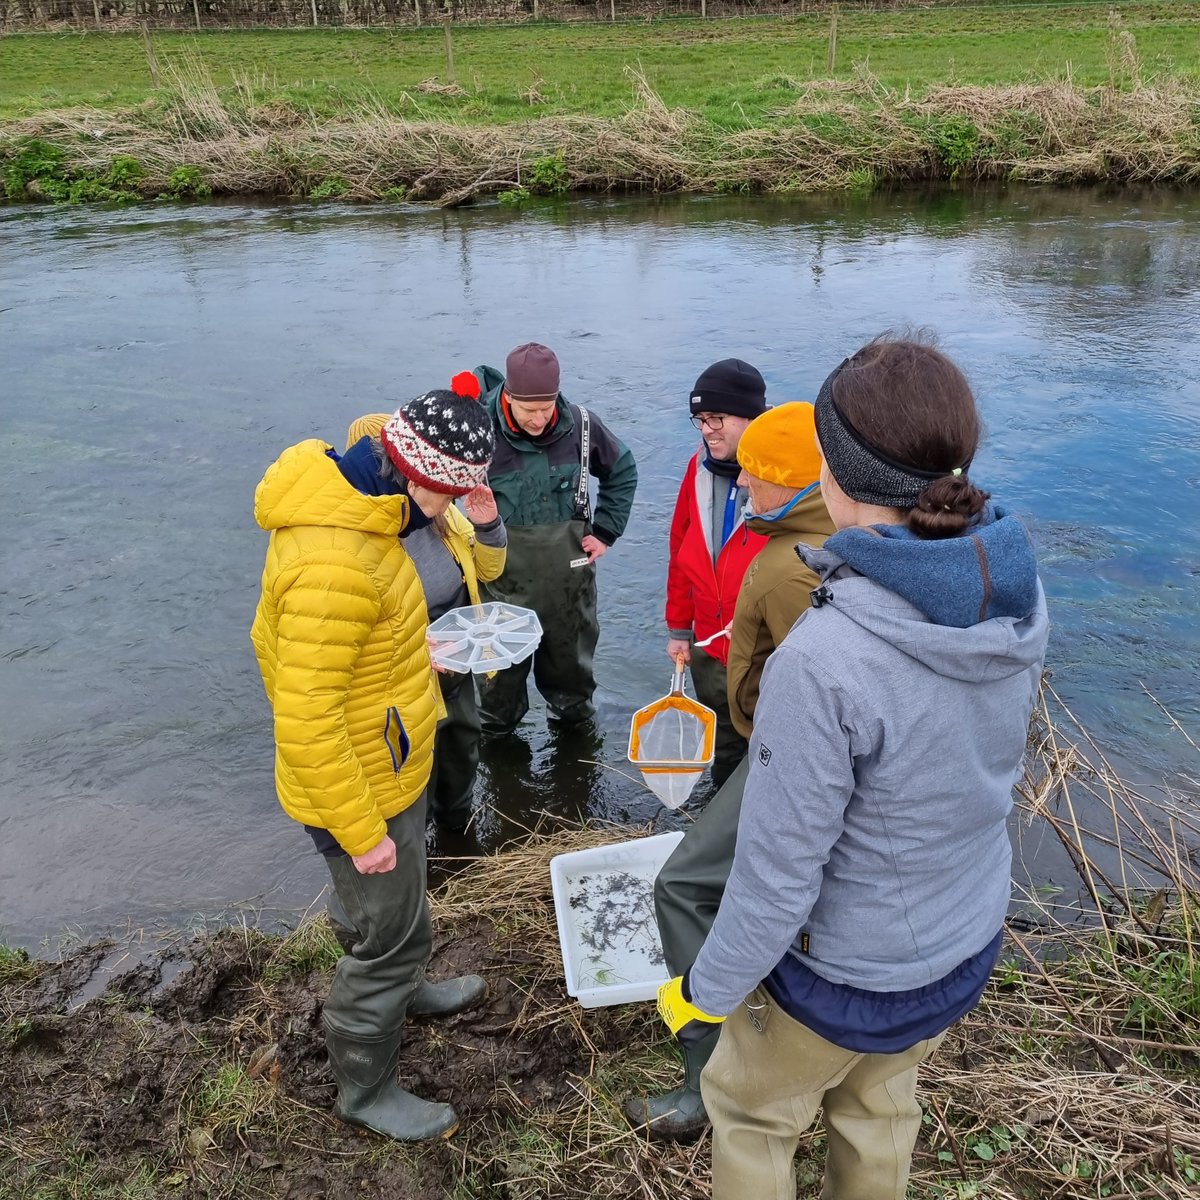 We had a fantastic riverfly training course at the weekend, finding lots of #invertebrates in the river Bela, #Cumbria. All part of the @Riverflies programme :) #learning #rivers #volunteering